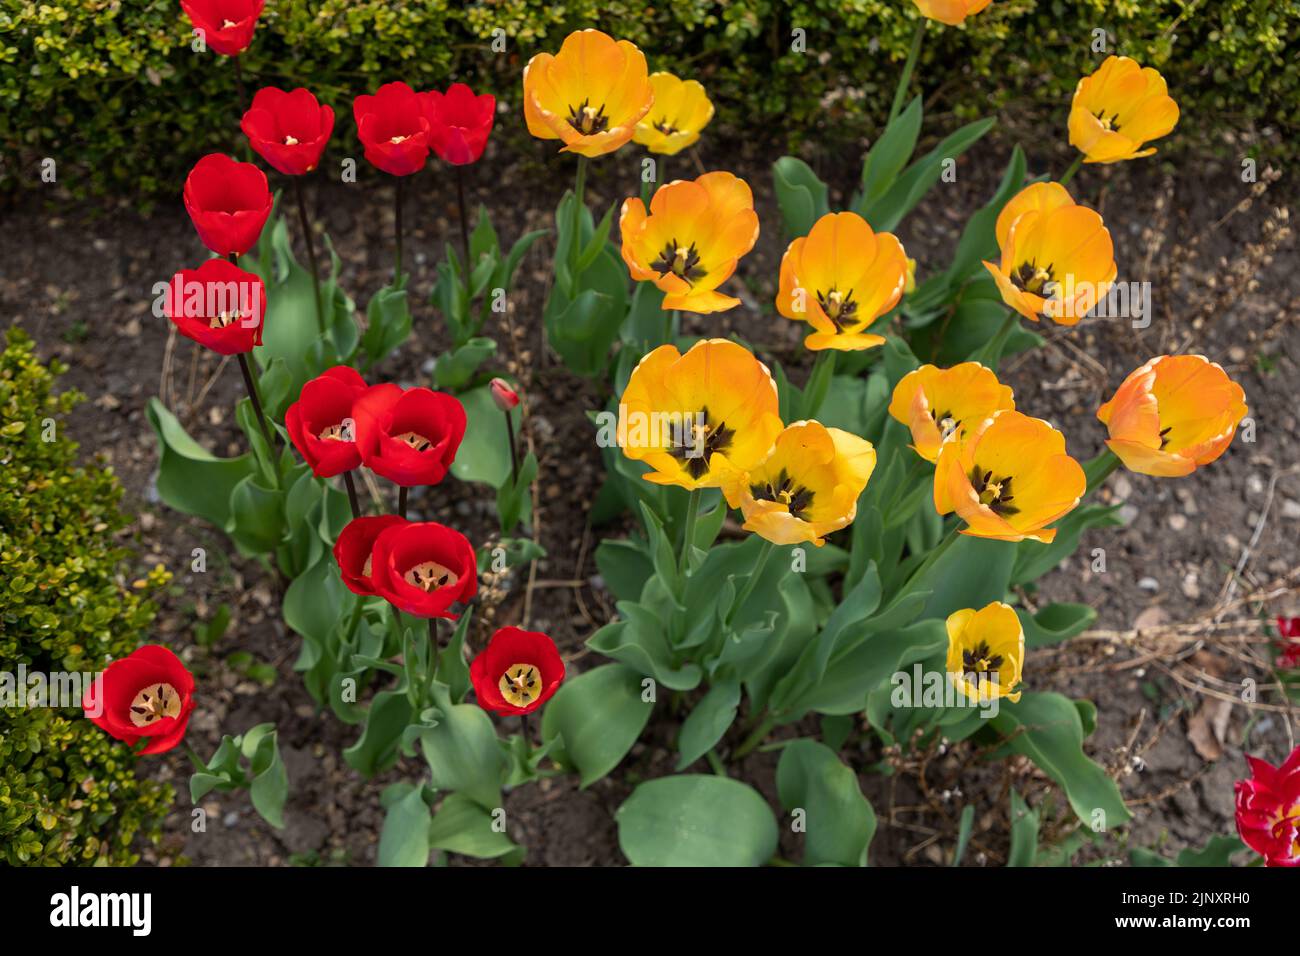 Top view, Selective focus on the red and yellow flowers of tulip plants in a garden. Stock Photo